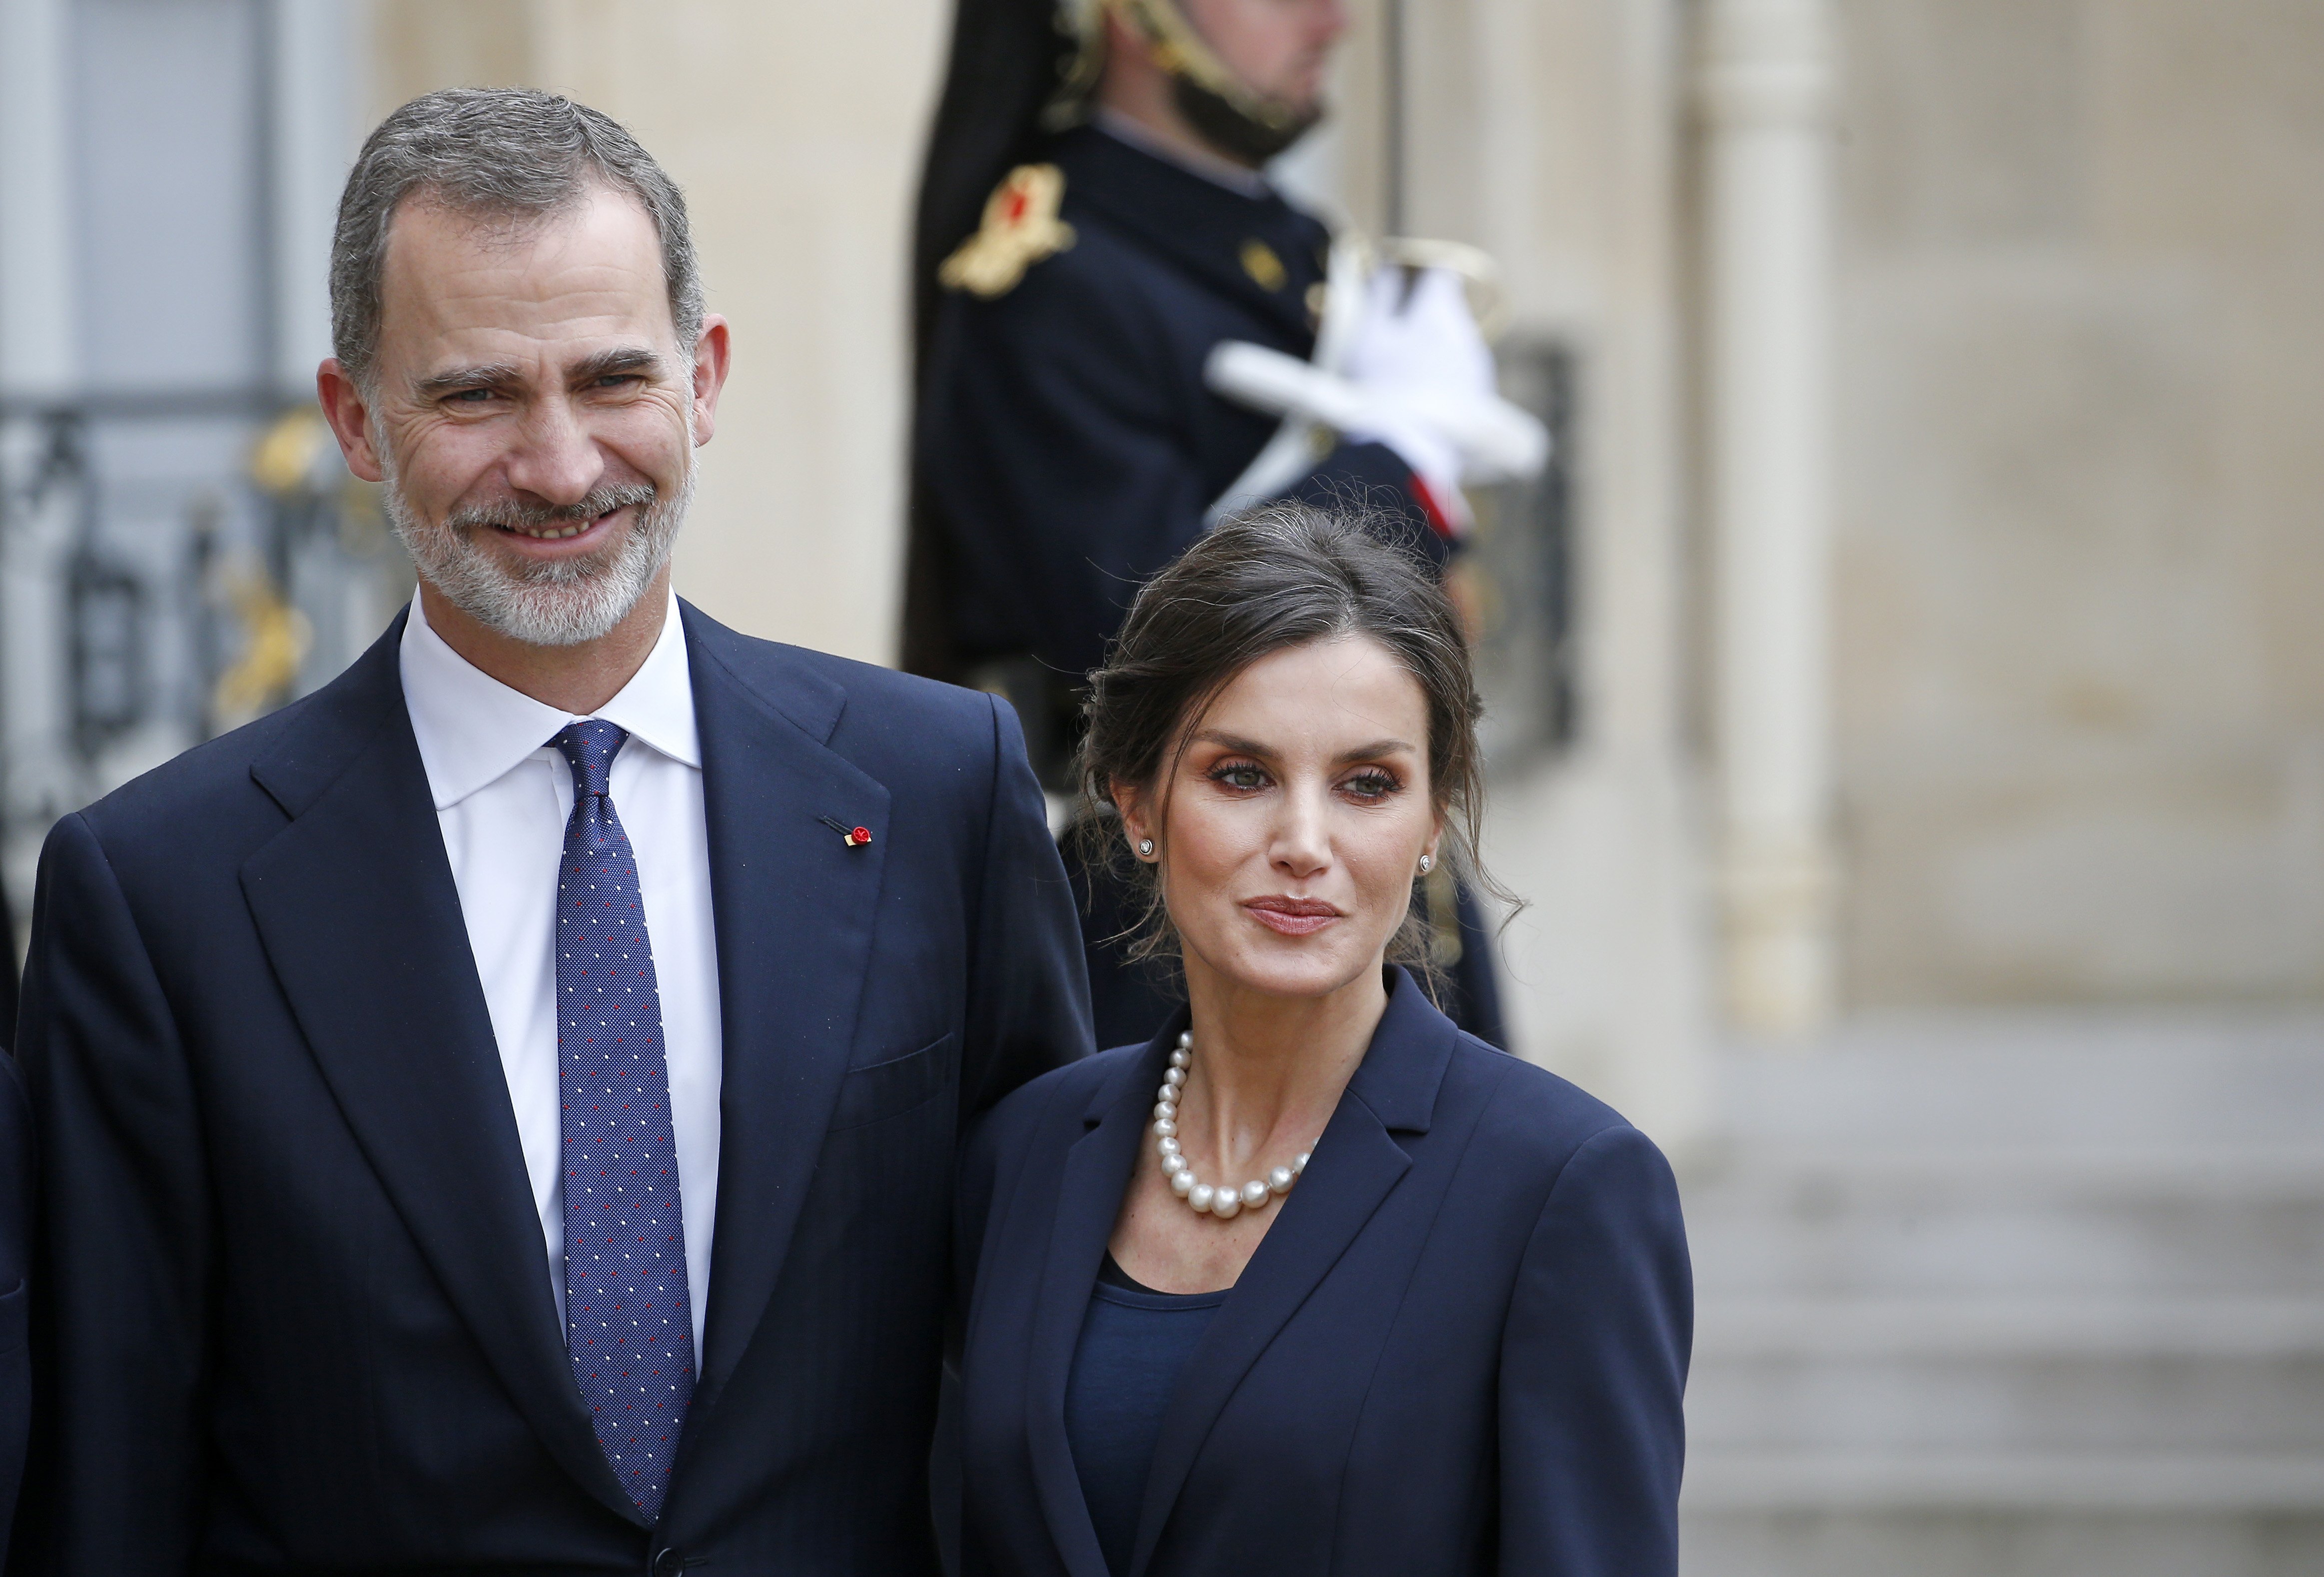 King Felipe of Spain and Queen Letizia of Spain pose after their lunch at the Elysee Presidential Palace on March 11, 2020. | Source: Getty Images